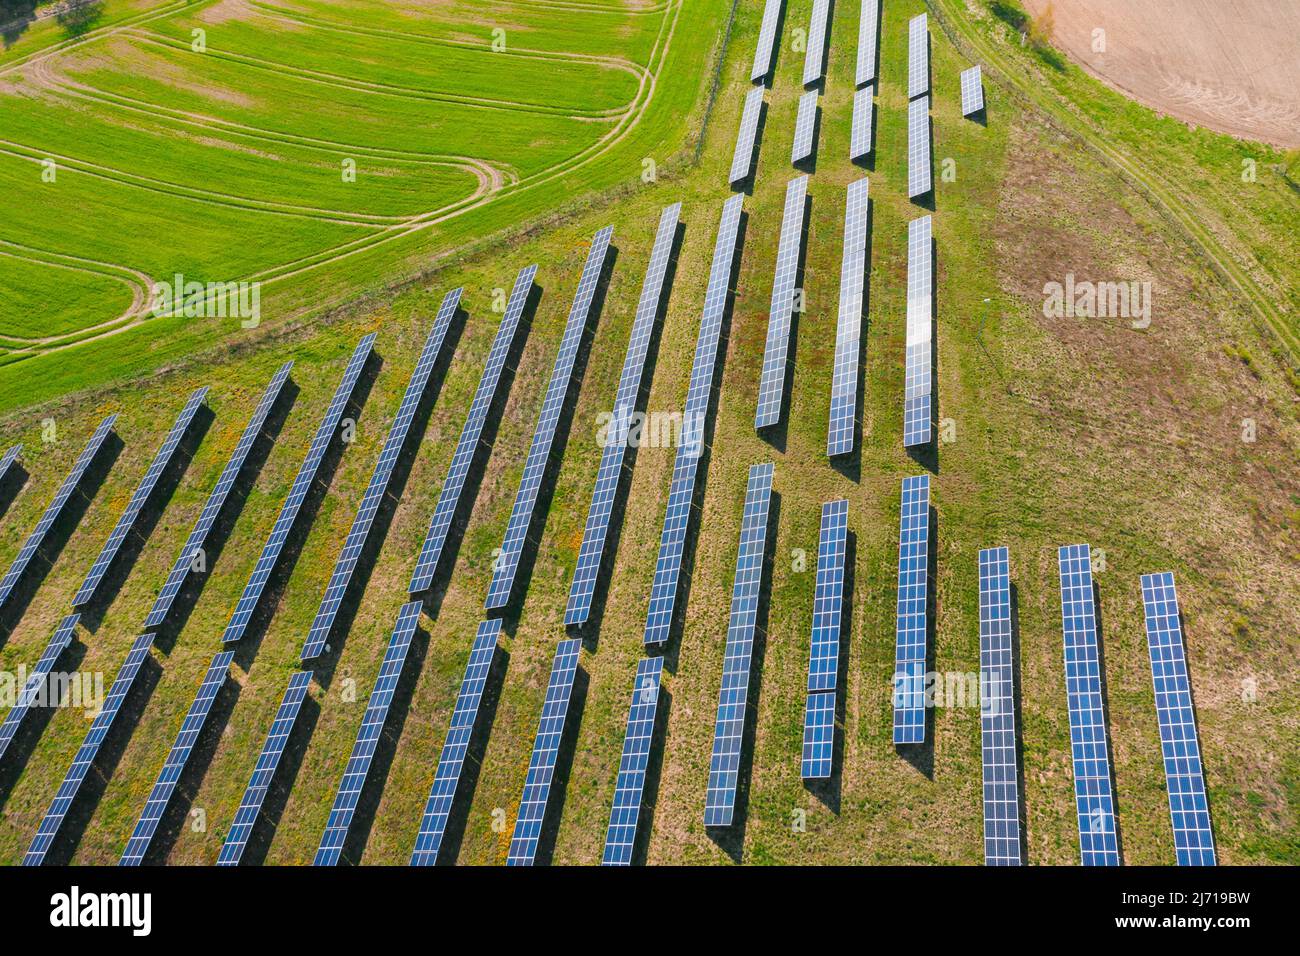 Solar panels on a hillside overgrown with green, illuminated by sunlight. View from the drone. Stock Photo